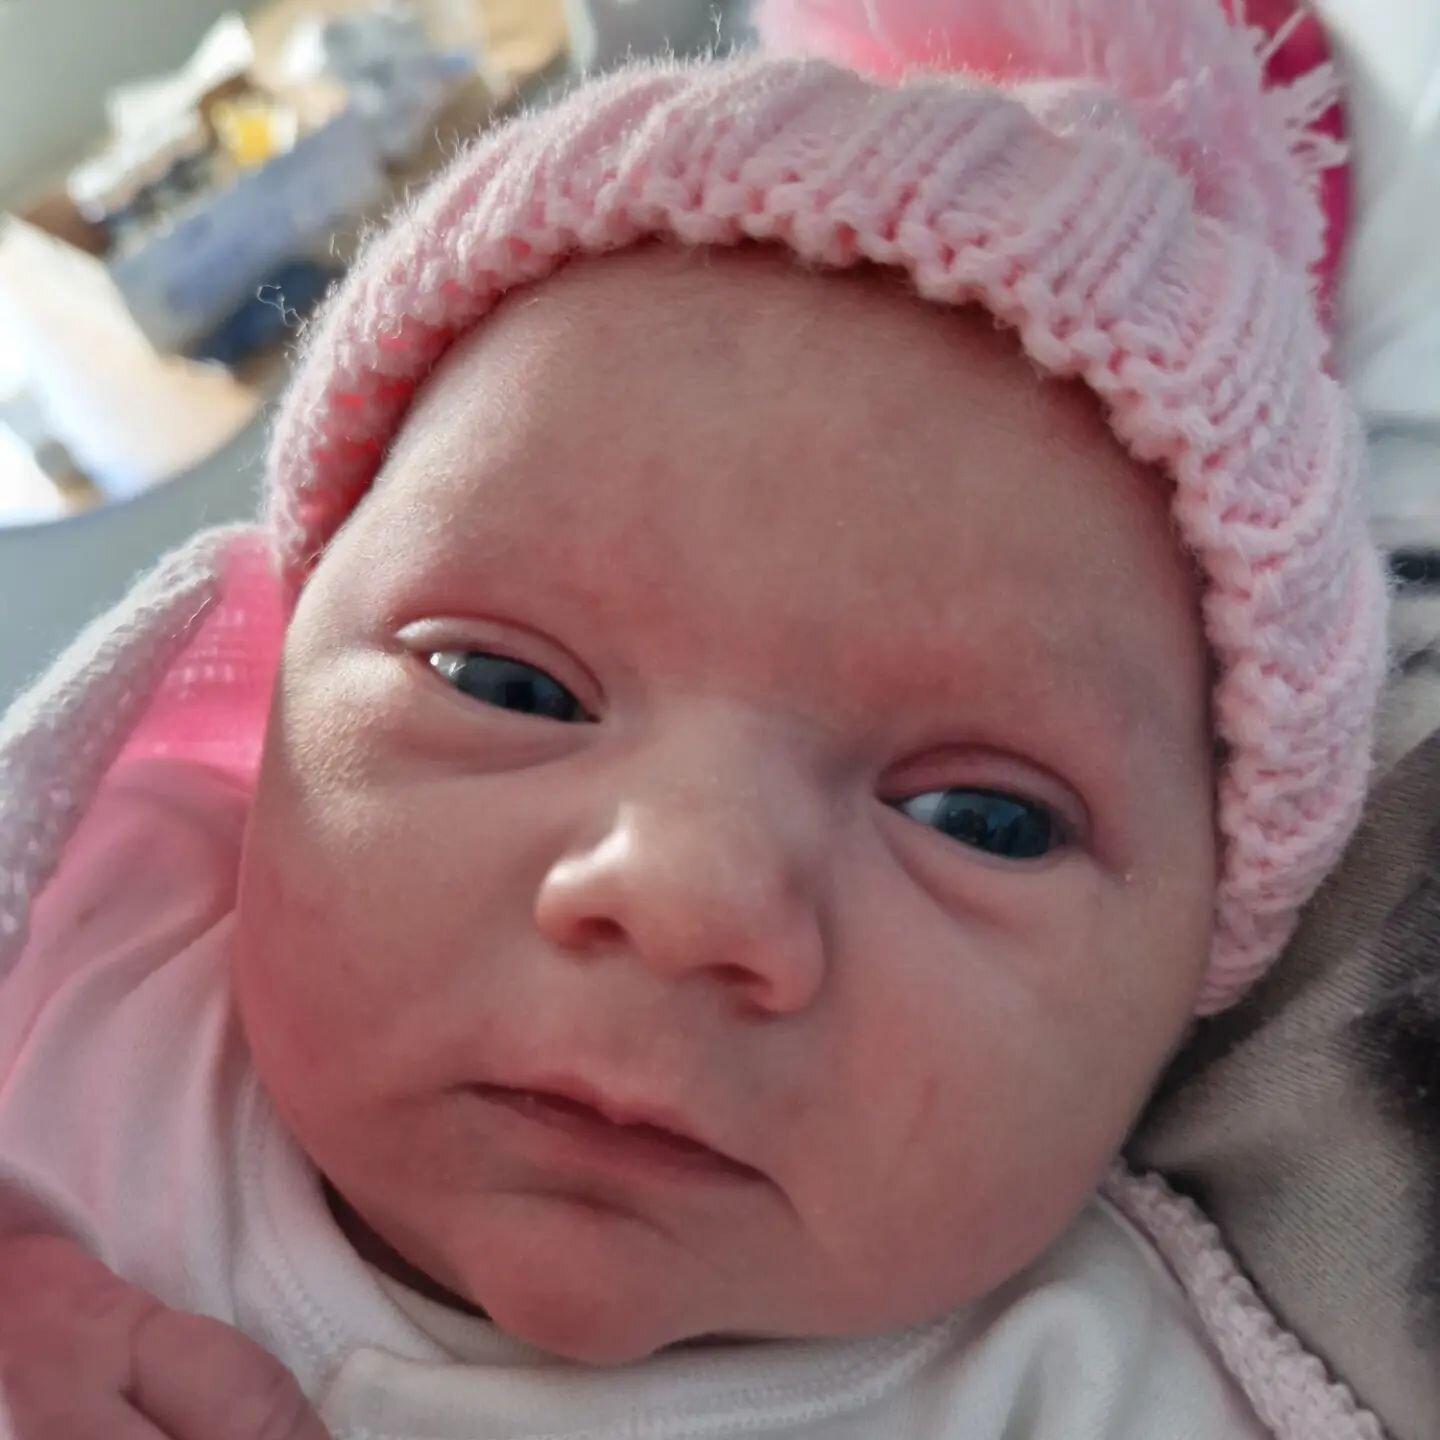 I'm delighted to introduce the newest member of the Martins World family. Averii Condon was born yesterday morning at 9.02am weighing in at 7lb 5oz. Both Mammy and Baby are doing great and will be home later today. 
Just another reason for me to cont